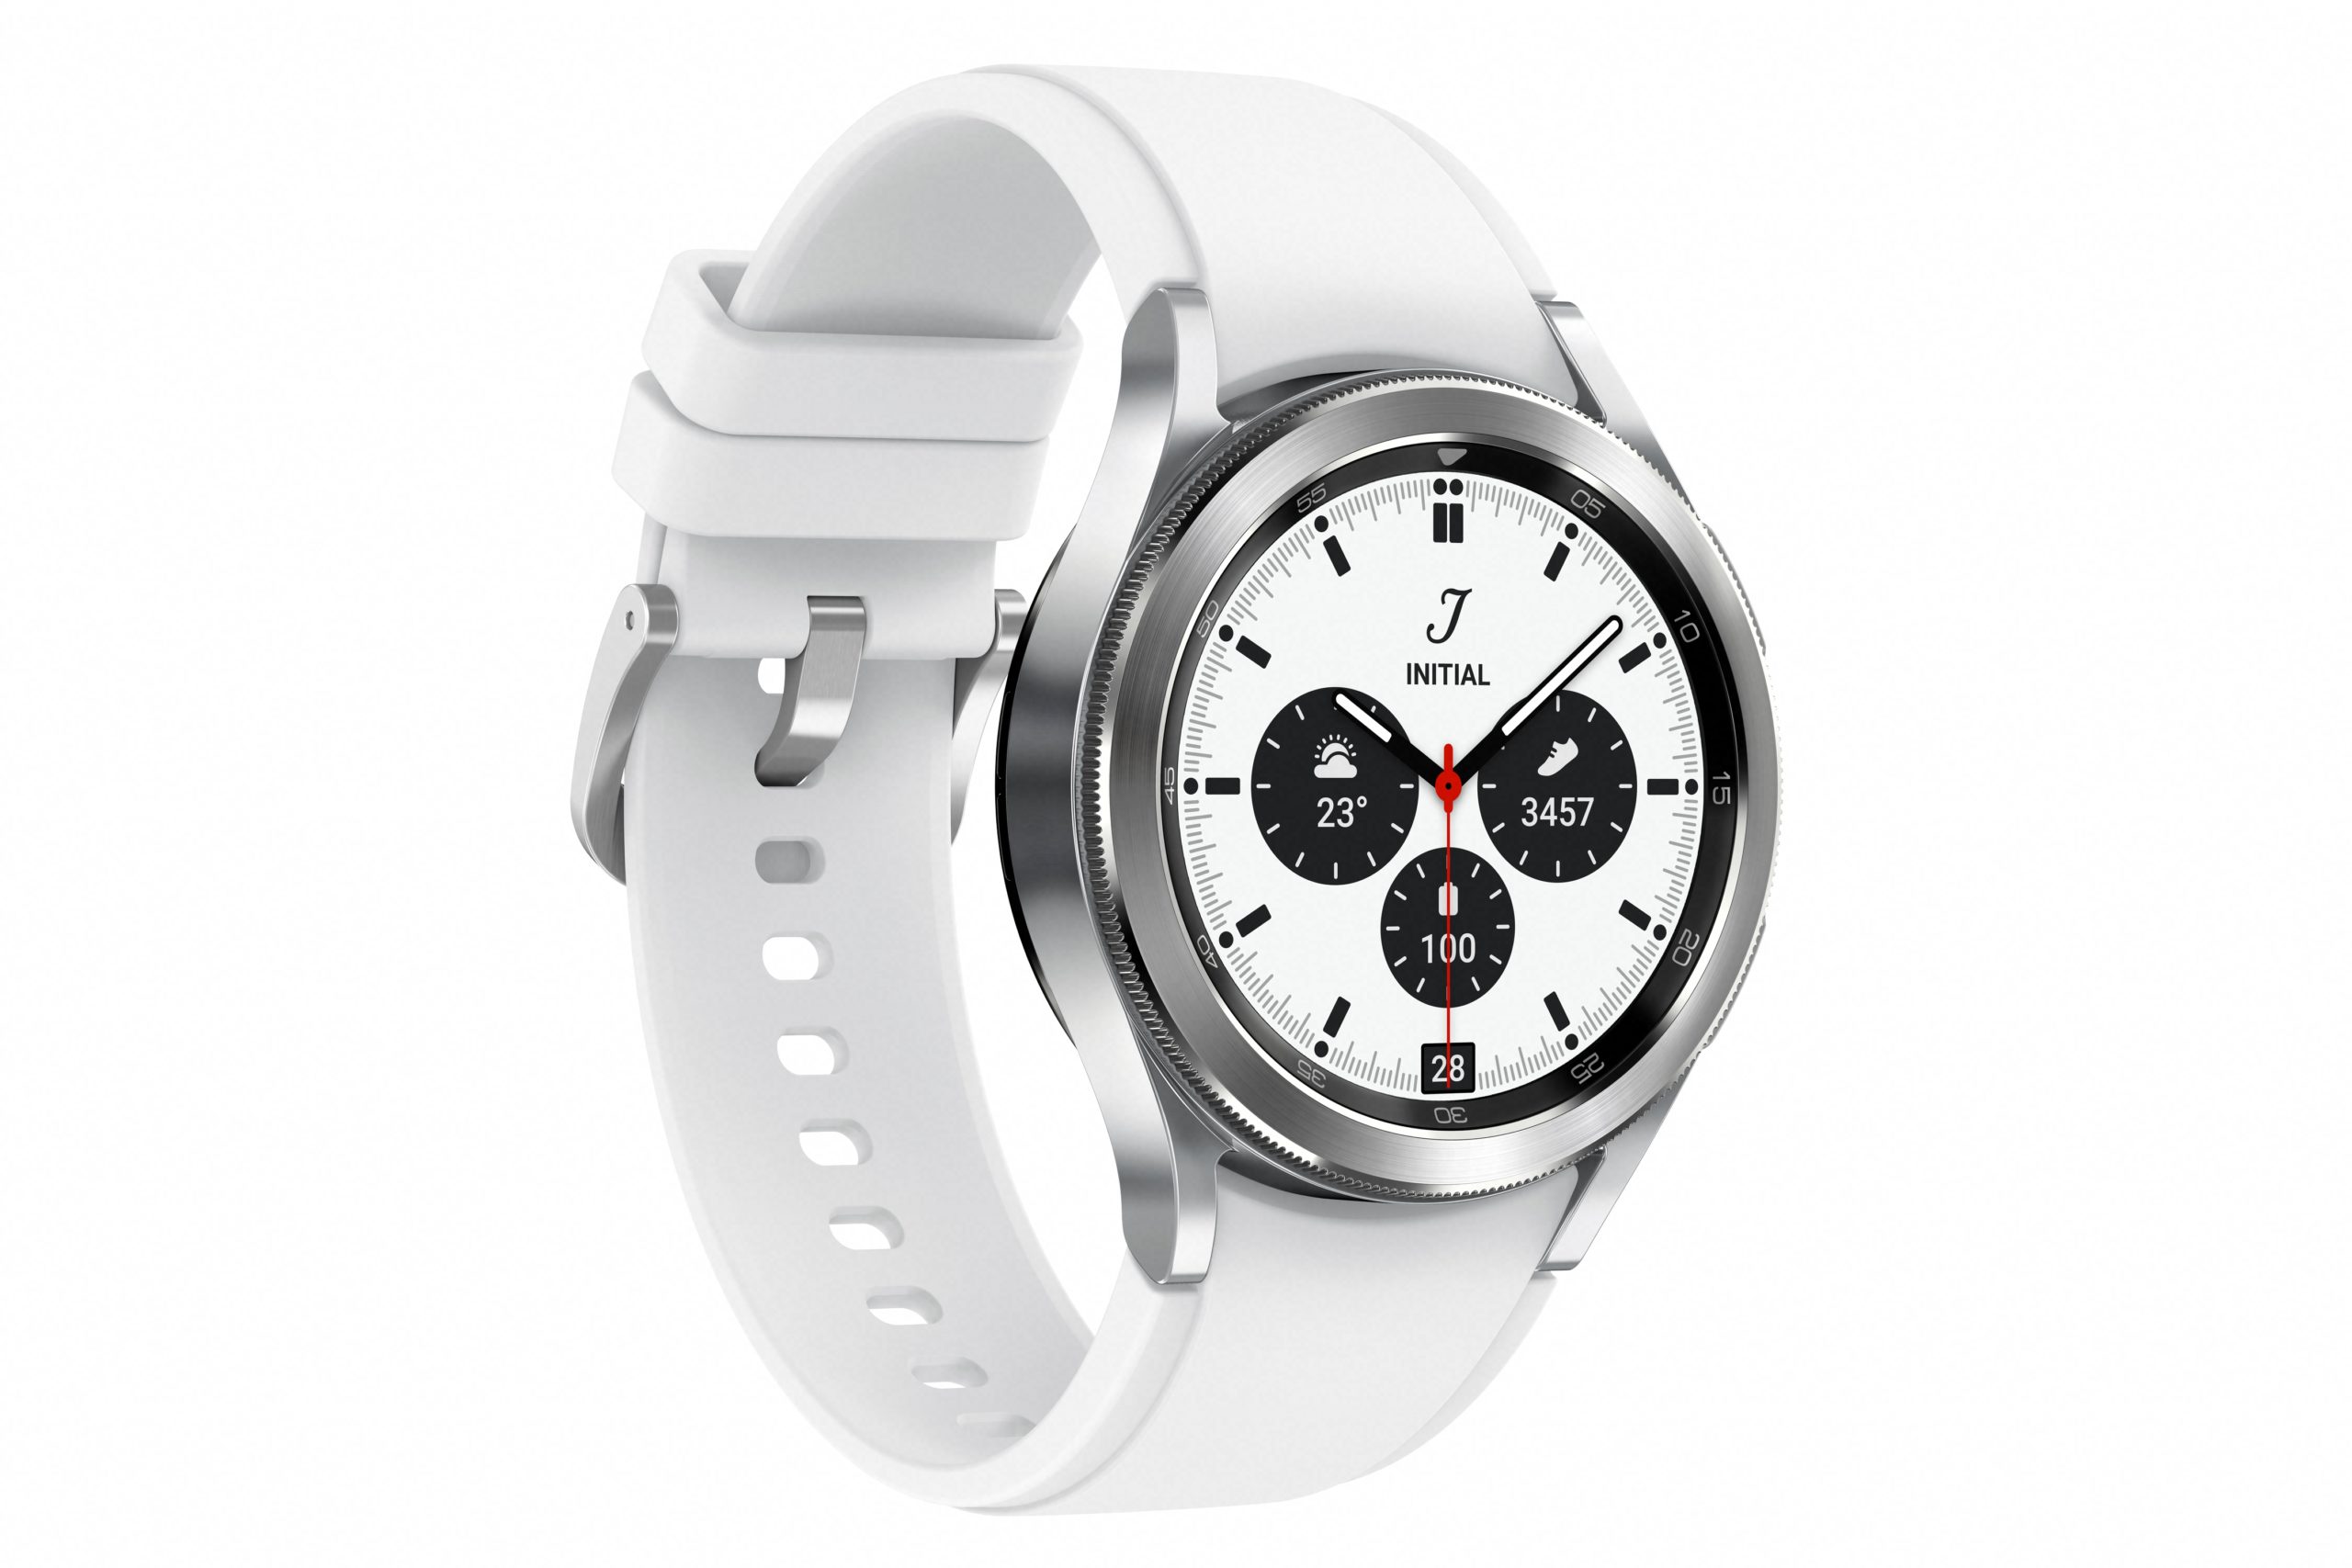 Samsung Galaxy Watch 4: Specs, Release Date and Australian Prices